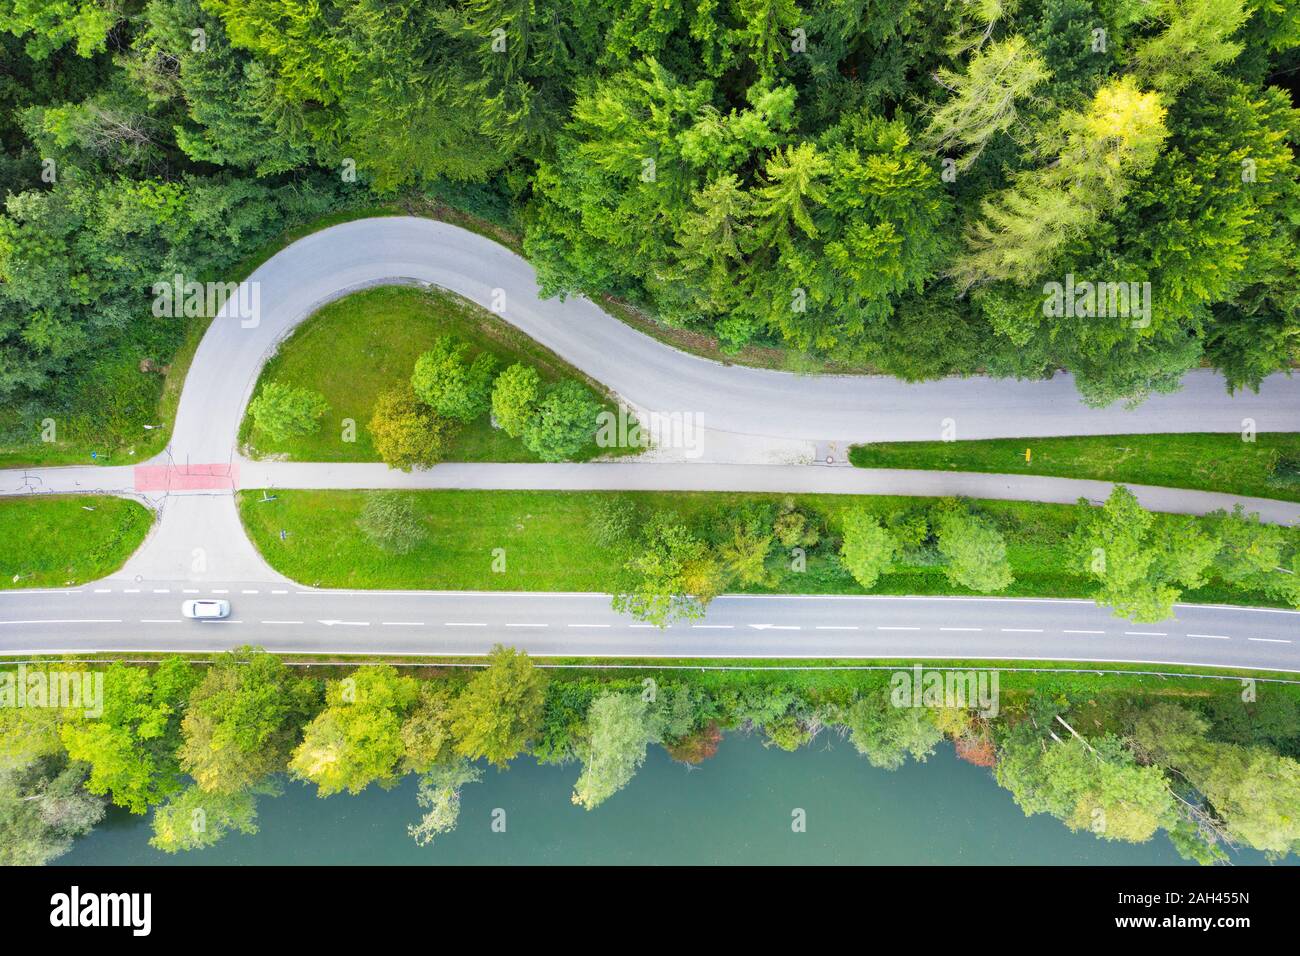 Germany, Bavaria, Eurasburg, Aerial view of edge of green spruce forest and junction of countryside highway Stock Photo